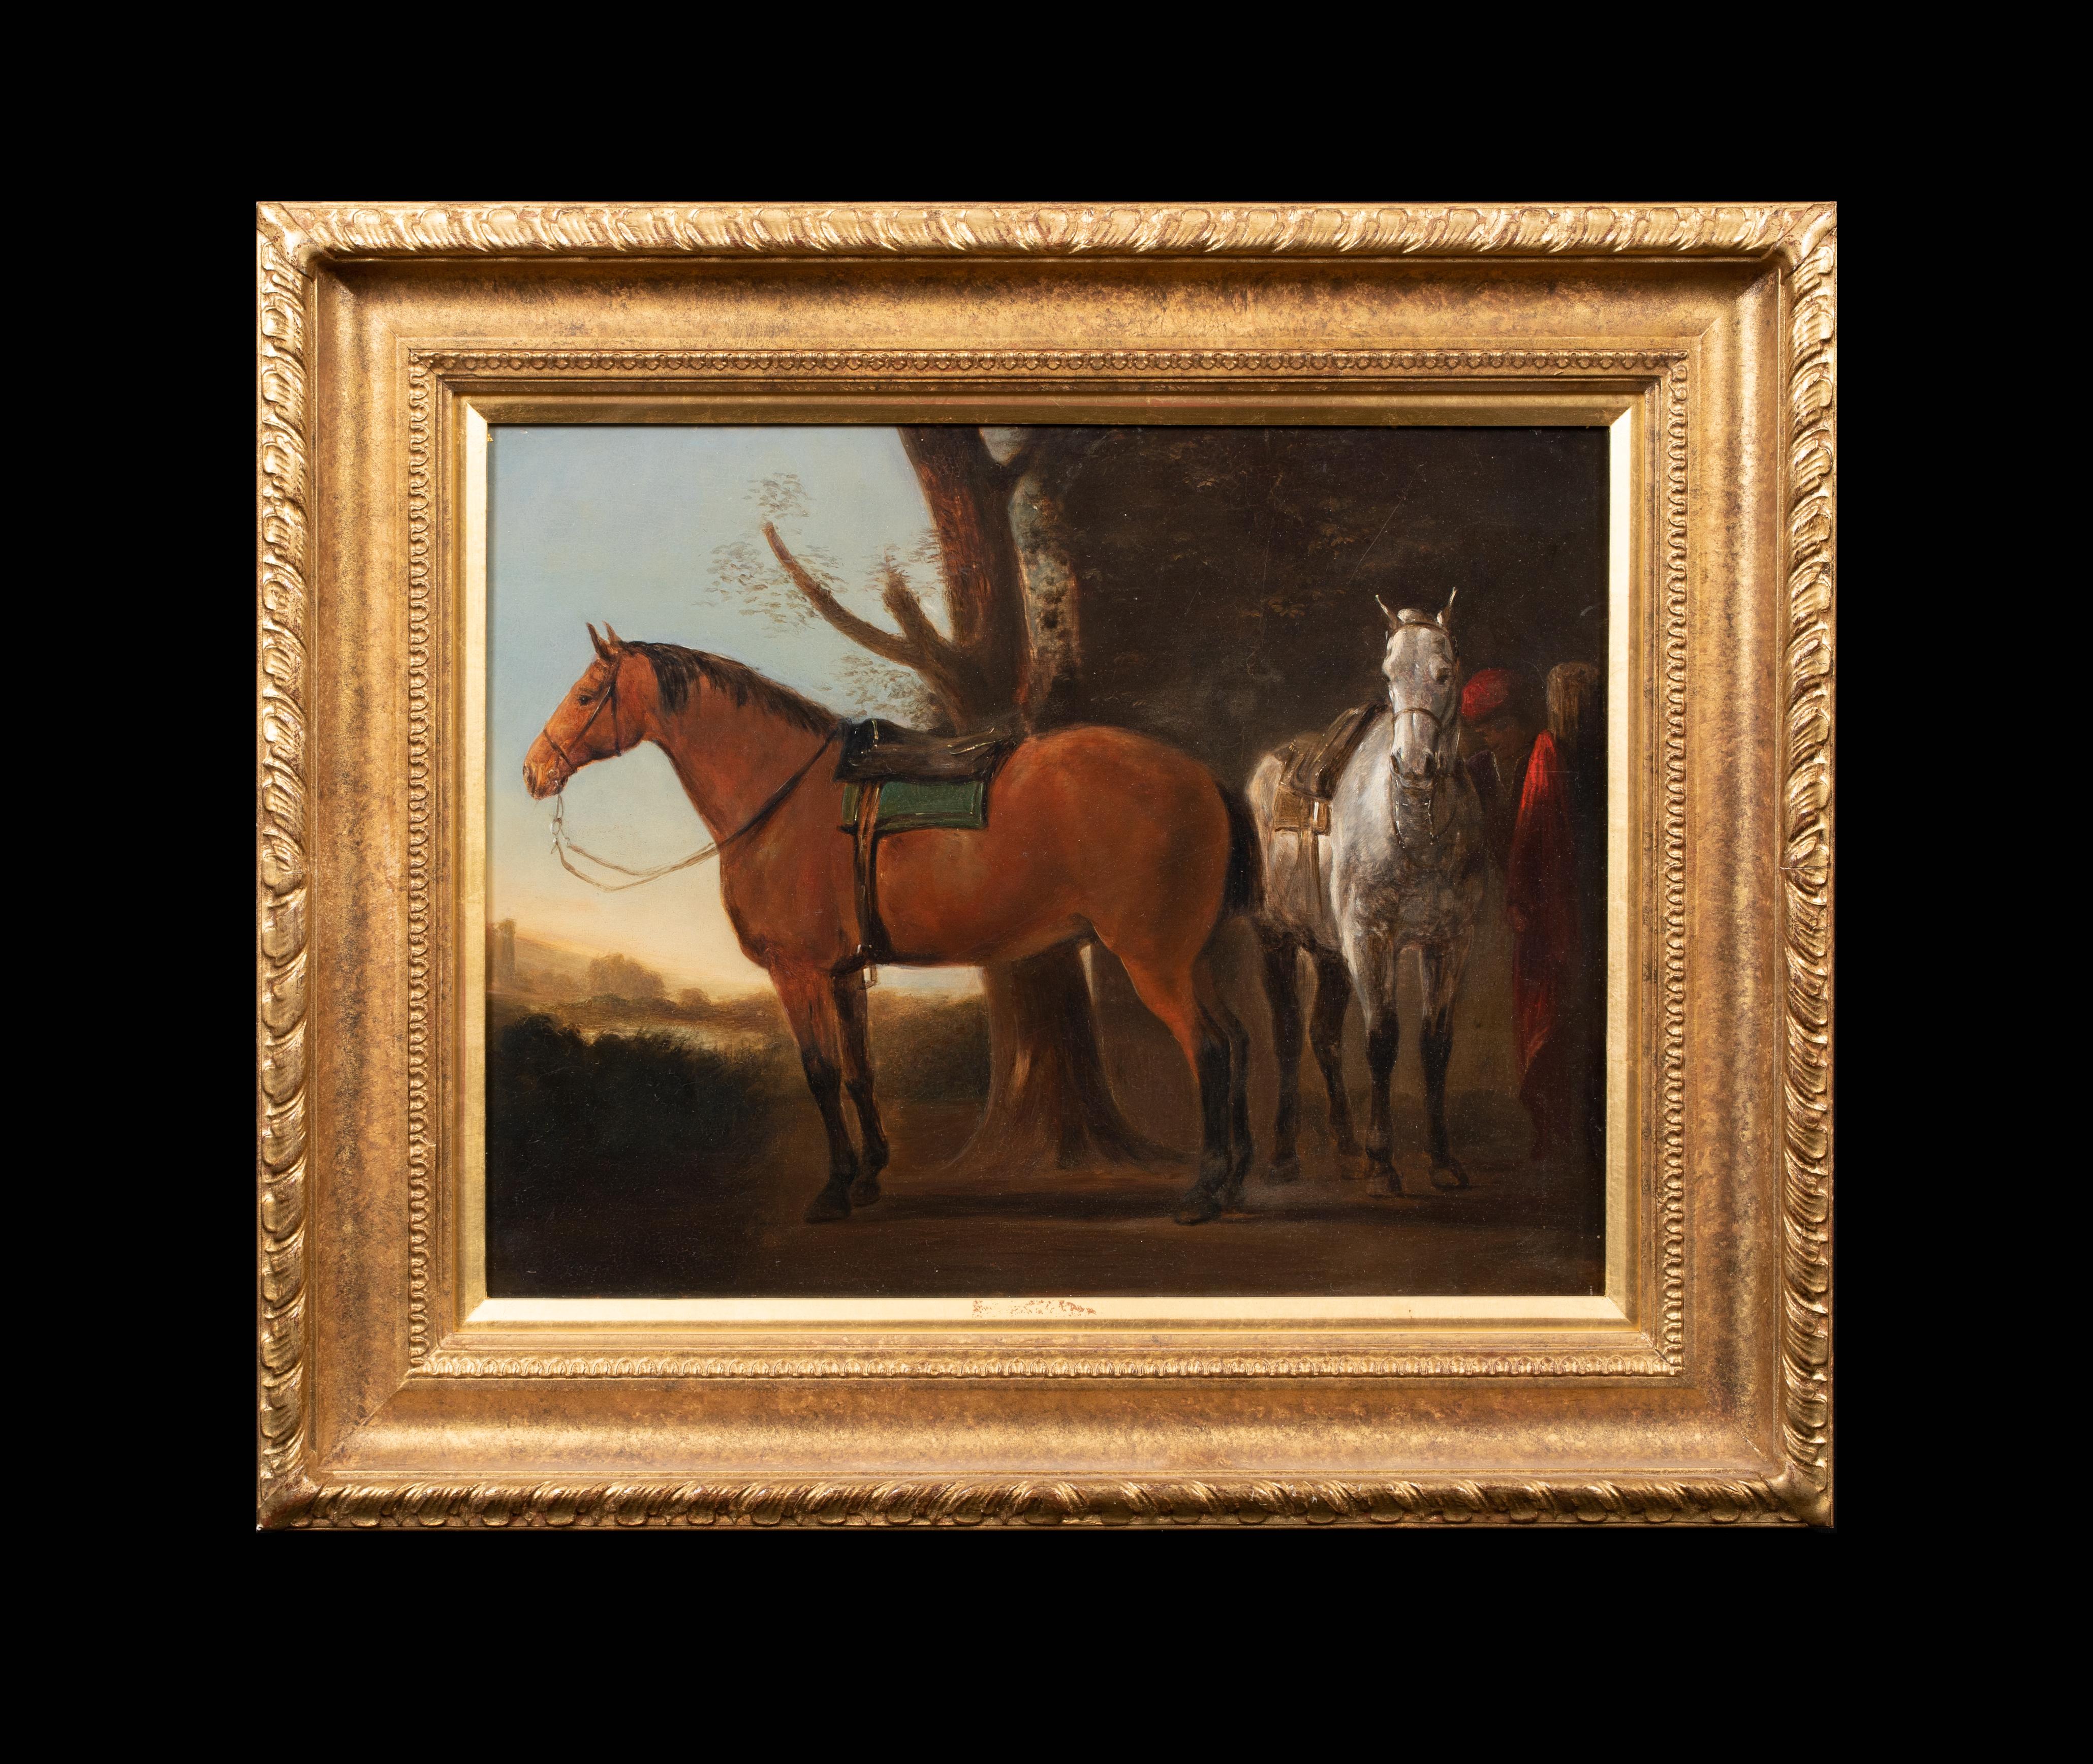 Study Of Horses. 19th Century  by William Henry WHEELWRIGHT (1820-1897) sales to - Painting by Unknown